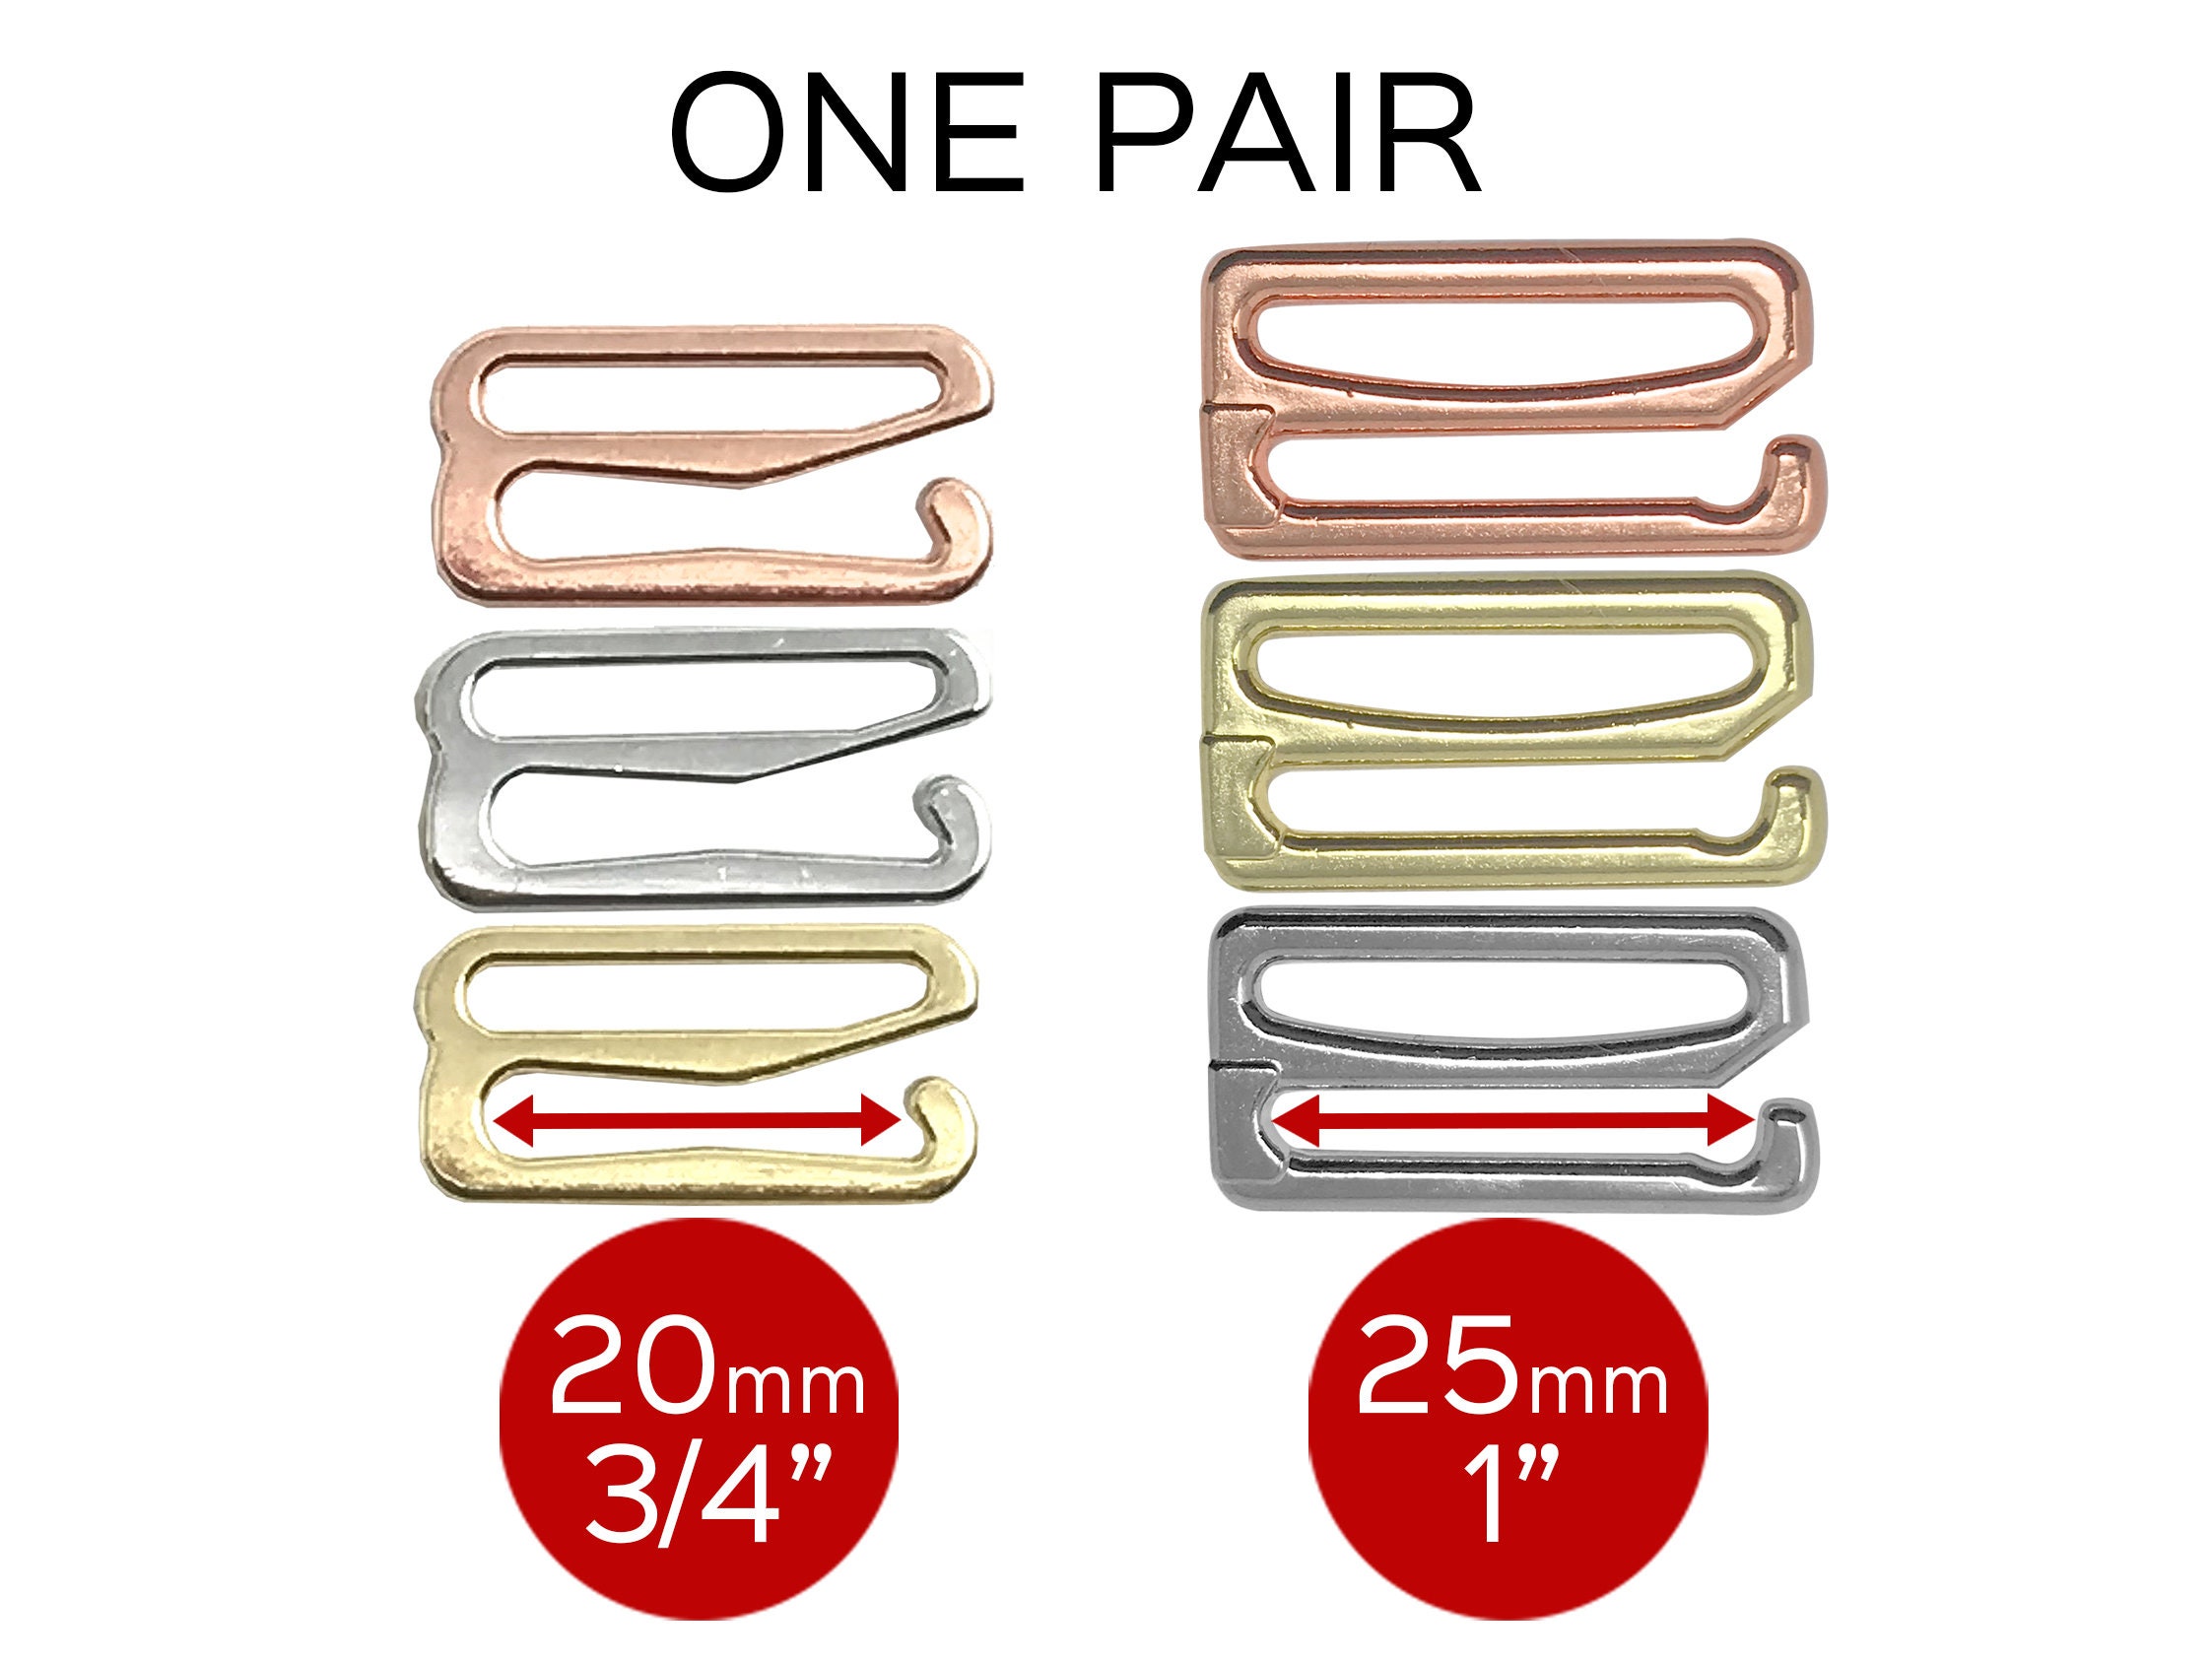 50 Pieces Swimsuit Bra Hooks Bra Strap Hook Replacement Bra Strap Slide  Hook Metal for Swimsuit Tops and Lingerie, 2 Sizes 15mm 20mm (Silver) PT544